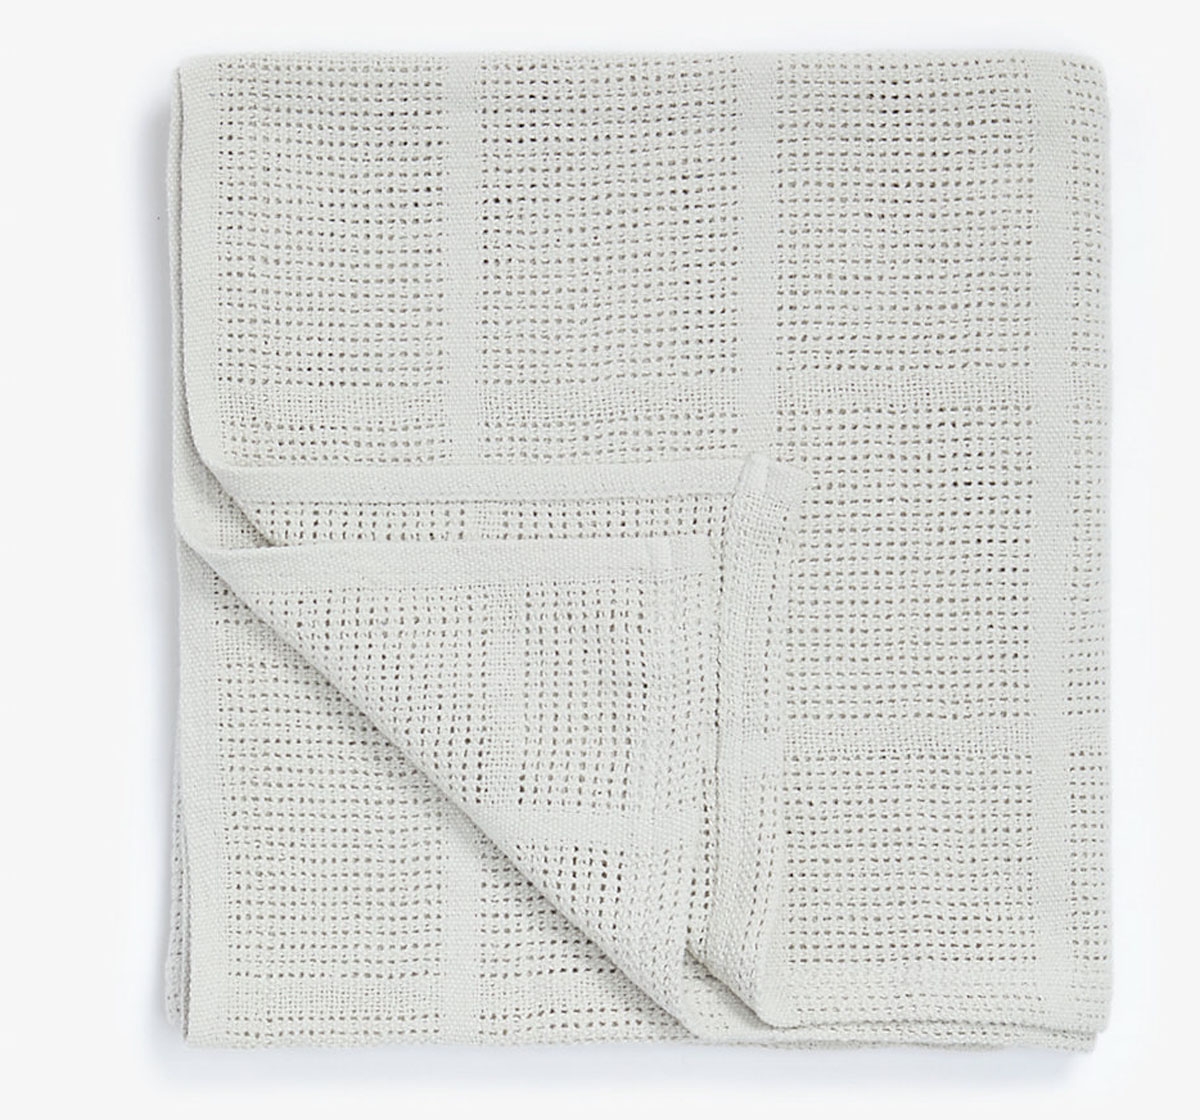 MOTHERCARE GREY ESSENTIALS COTBED CELLULAR BLANKET